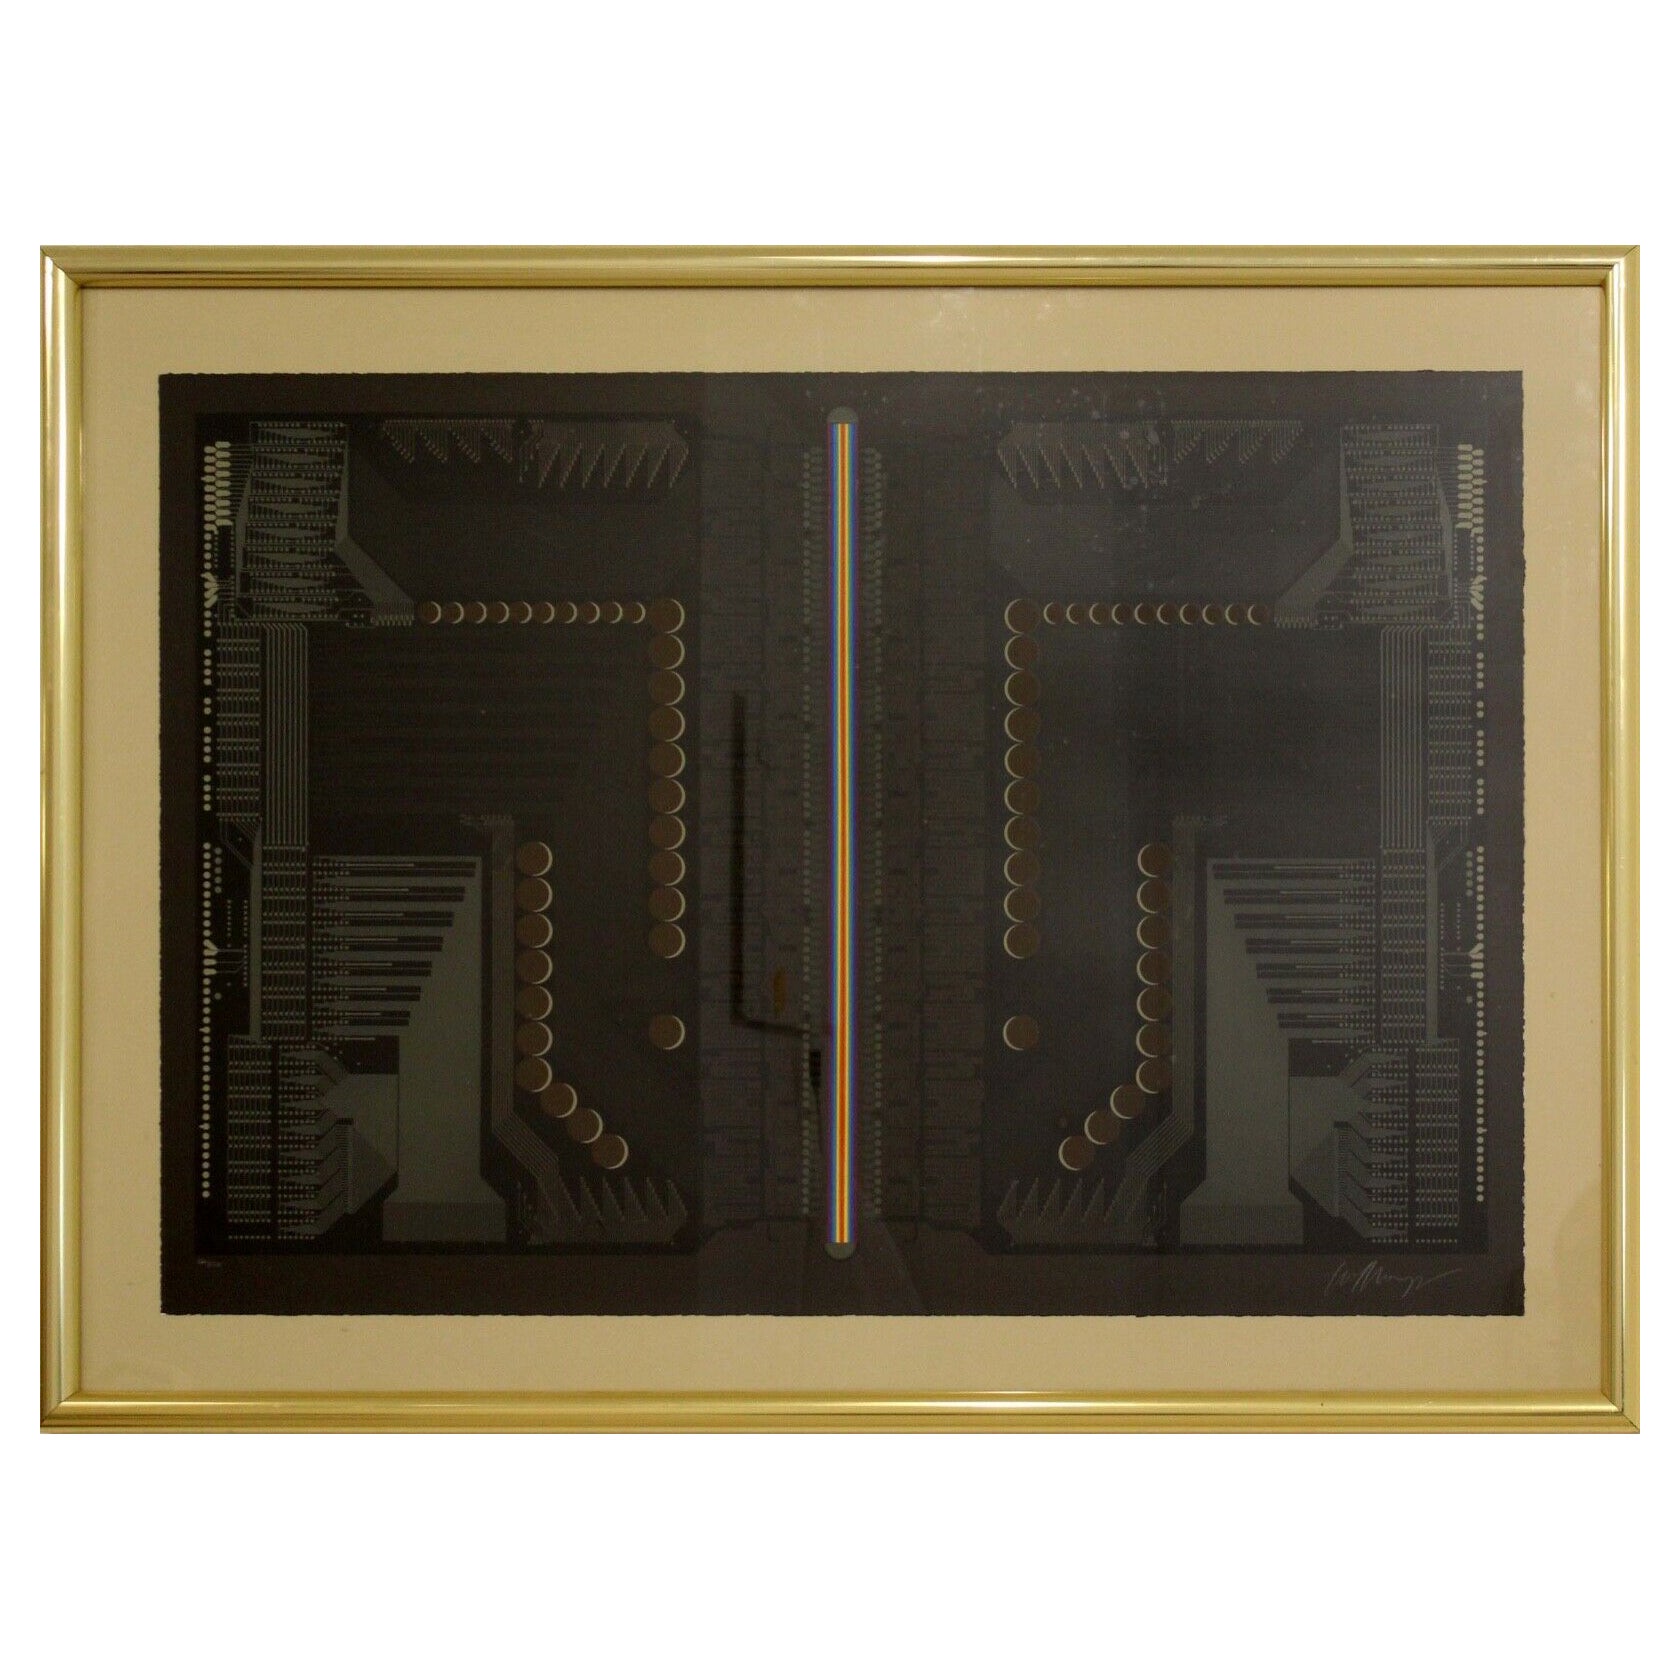 Modern Retro Abstract Circuit Board Design Lithograph Signed 121/150 Framed